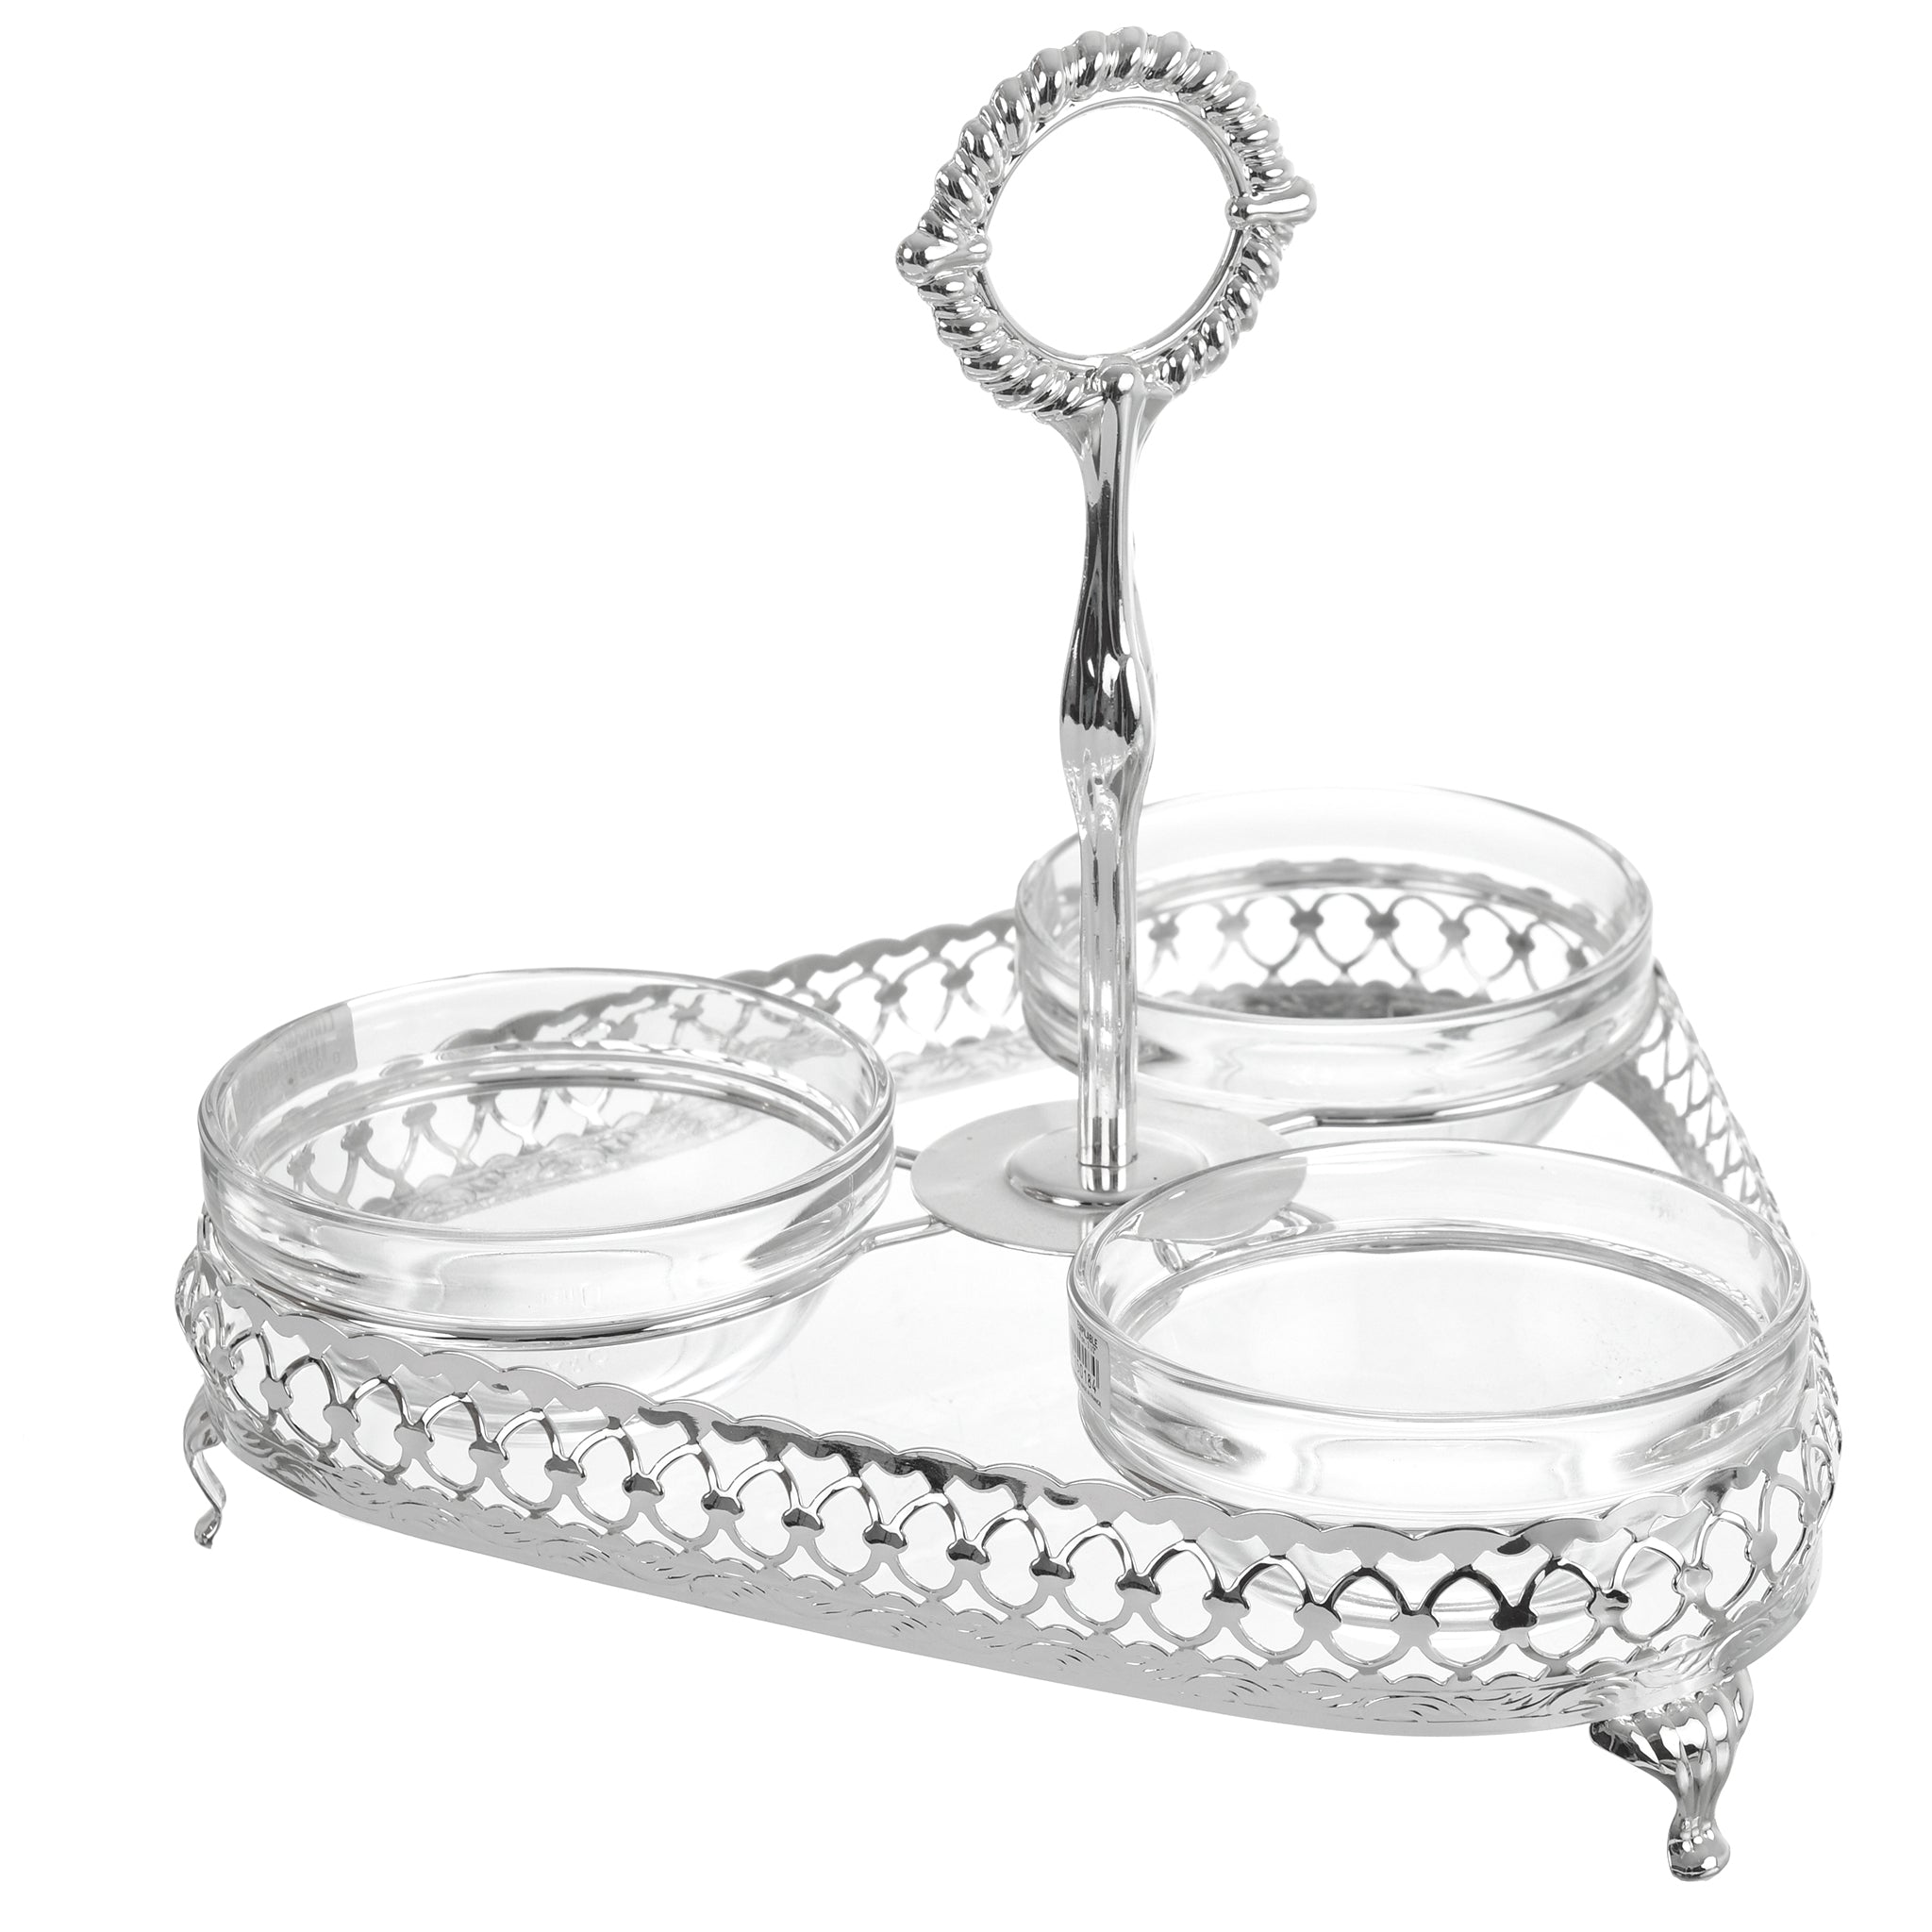 Queen Anne - Triangular Hors D'oeuvre - 3 Parts - 22x21cm - Silver Plated Metal - 26000423